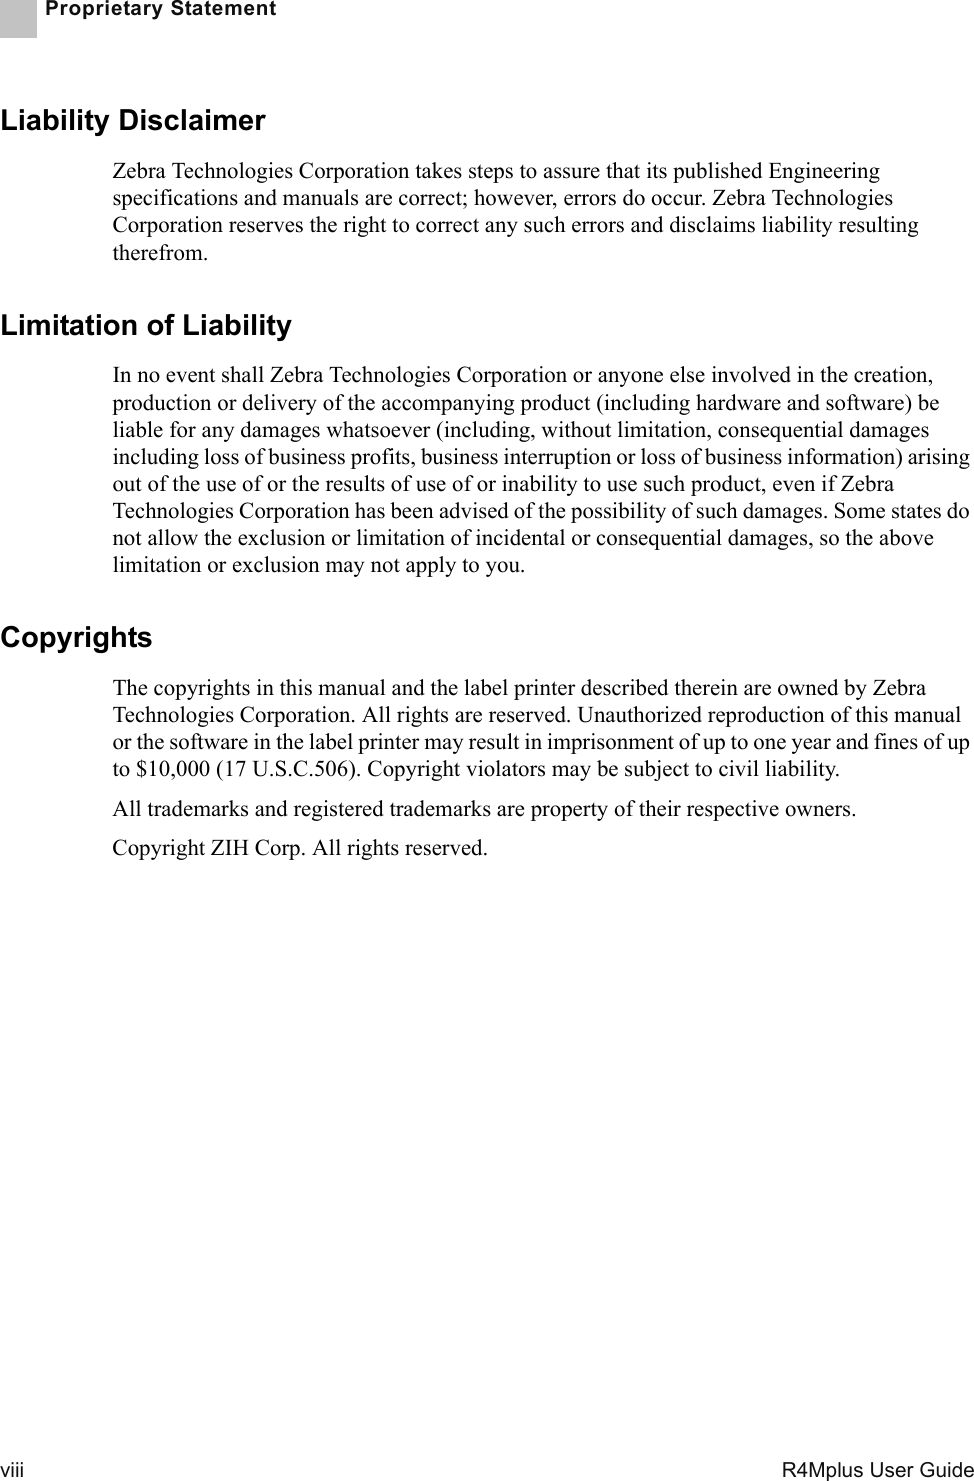 viii   R4Mplus User GuideProprietary StatementLiability DisclaimerZebra Technologies Corporation takes steps to assure that its published Engineering specifications and manuals are correct; however, errors do occur. Zebra Technologies Corporation reserves the right to correct any such errors and disclaims liability resulting therefrom.Limitation of Liability In no event shall Zebra Technologies Corporation or anyone else involved in the creation, production or delivery of the accompanying product (including hardware and software) be liable for any damages whatsoever (including, without limitation, consequential damages including loss of business profits, business interruption or loss of business information) arising out of the use of or the results of use of or inability to use such product, even if Zebra Technologies Corporation has been advised of the possibility of such damages. Some states do not allow the exclusion or limitation of incidental or consequential damages, so the above limitation or exclusion may not apply to you.CopyrightsThe copyrights in this manual and the label printer described therein are owned by Zebra Technologies Corporation. All rights are reserved. Unauthorized reproduction of this manual or the software in the label printer may result in imprisonment of up to one year and fines of up to $10,000 (17 U.S.C.506). Copyright violators may be subject to civil liability.All trademarks and registered trademarks are property of their respective owners.Copyright ZIH Corp. All rights reserved.